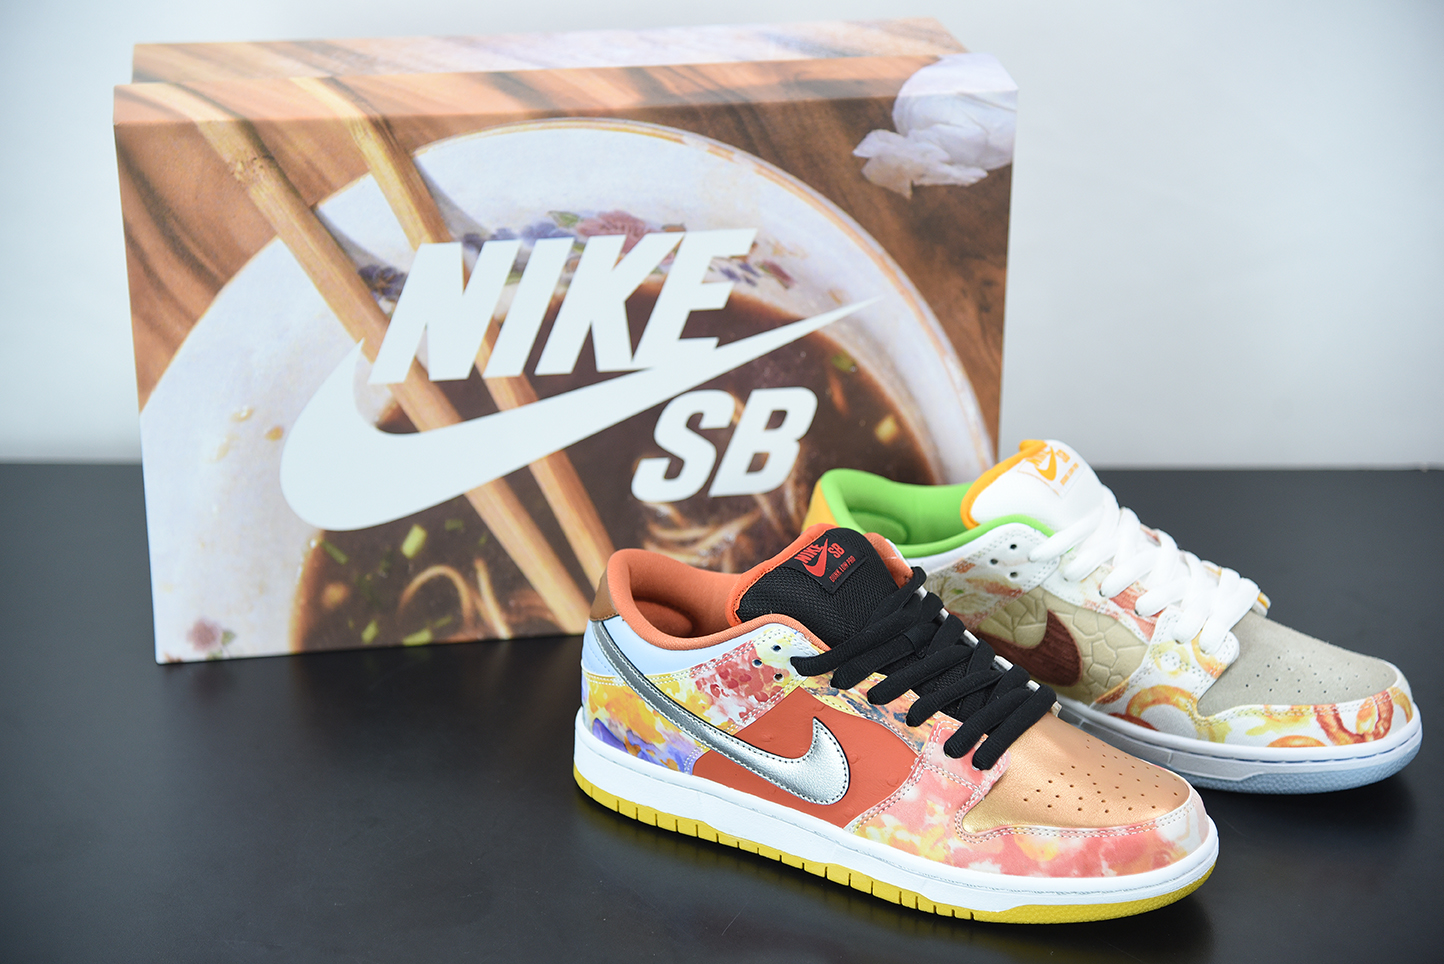 800 For nike overbreak sp sneakers item - Nike KD China Edition CNY Street Hawker CV1628 - Кроссовки nike air force winter black yellow